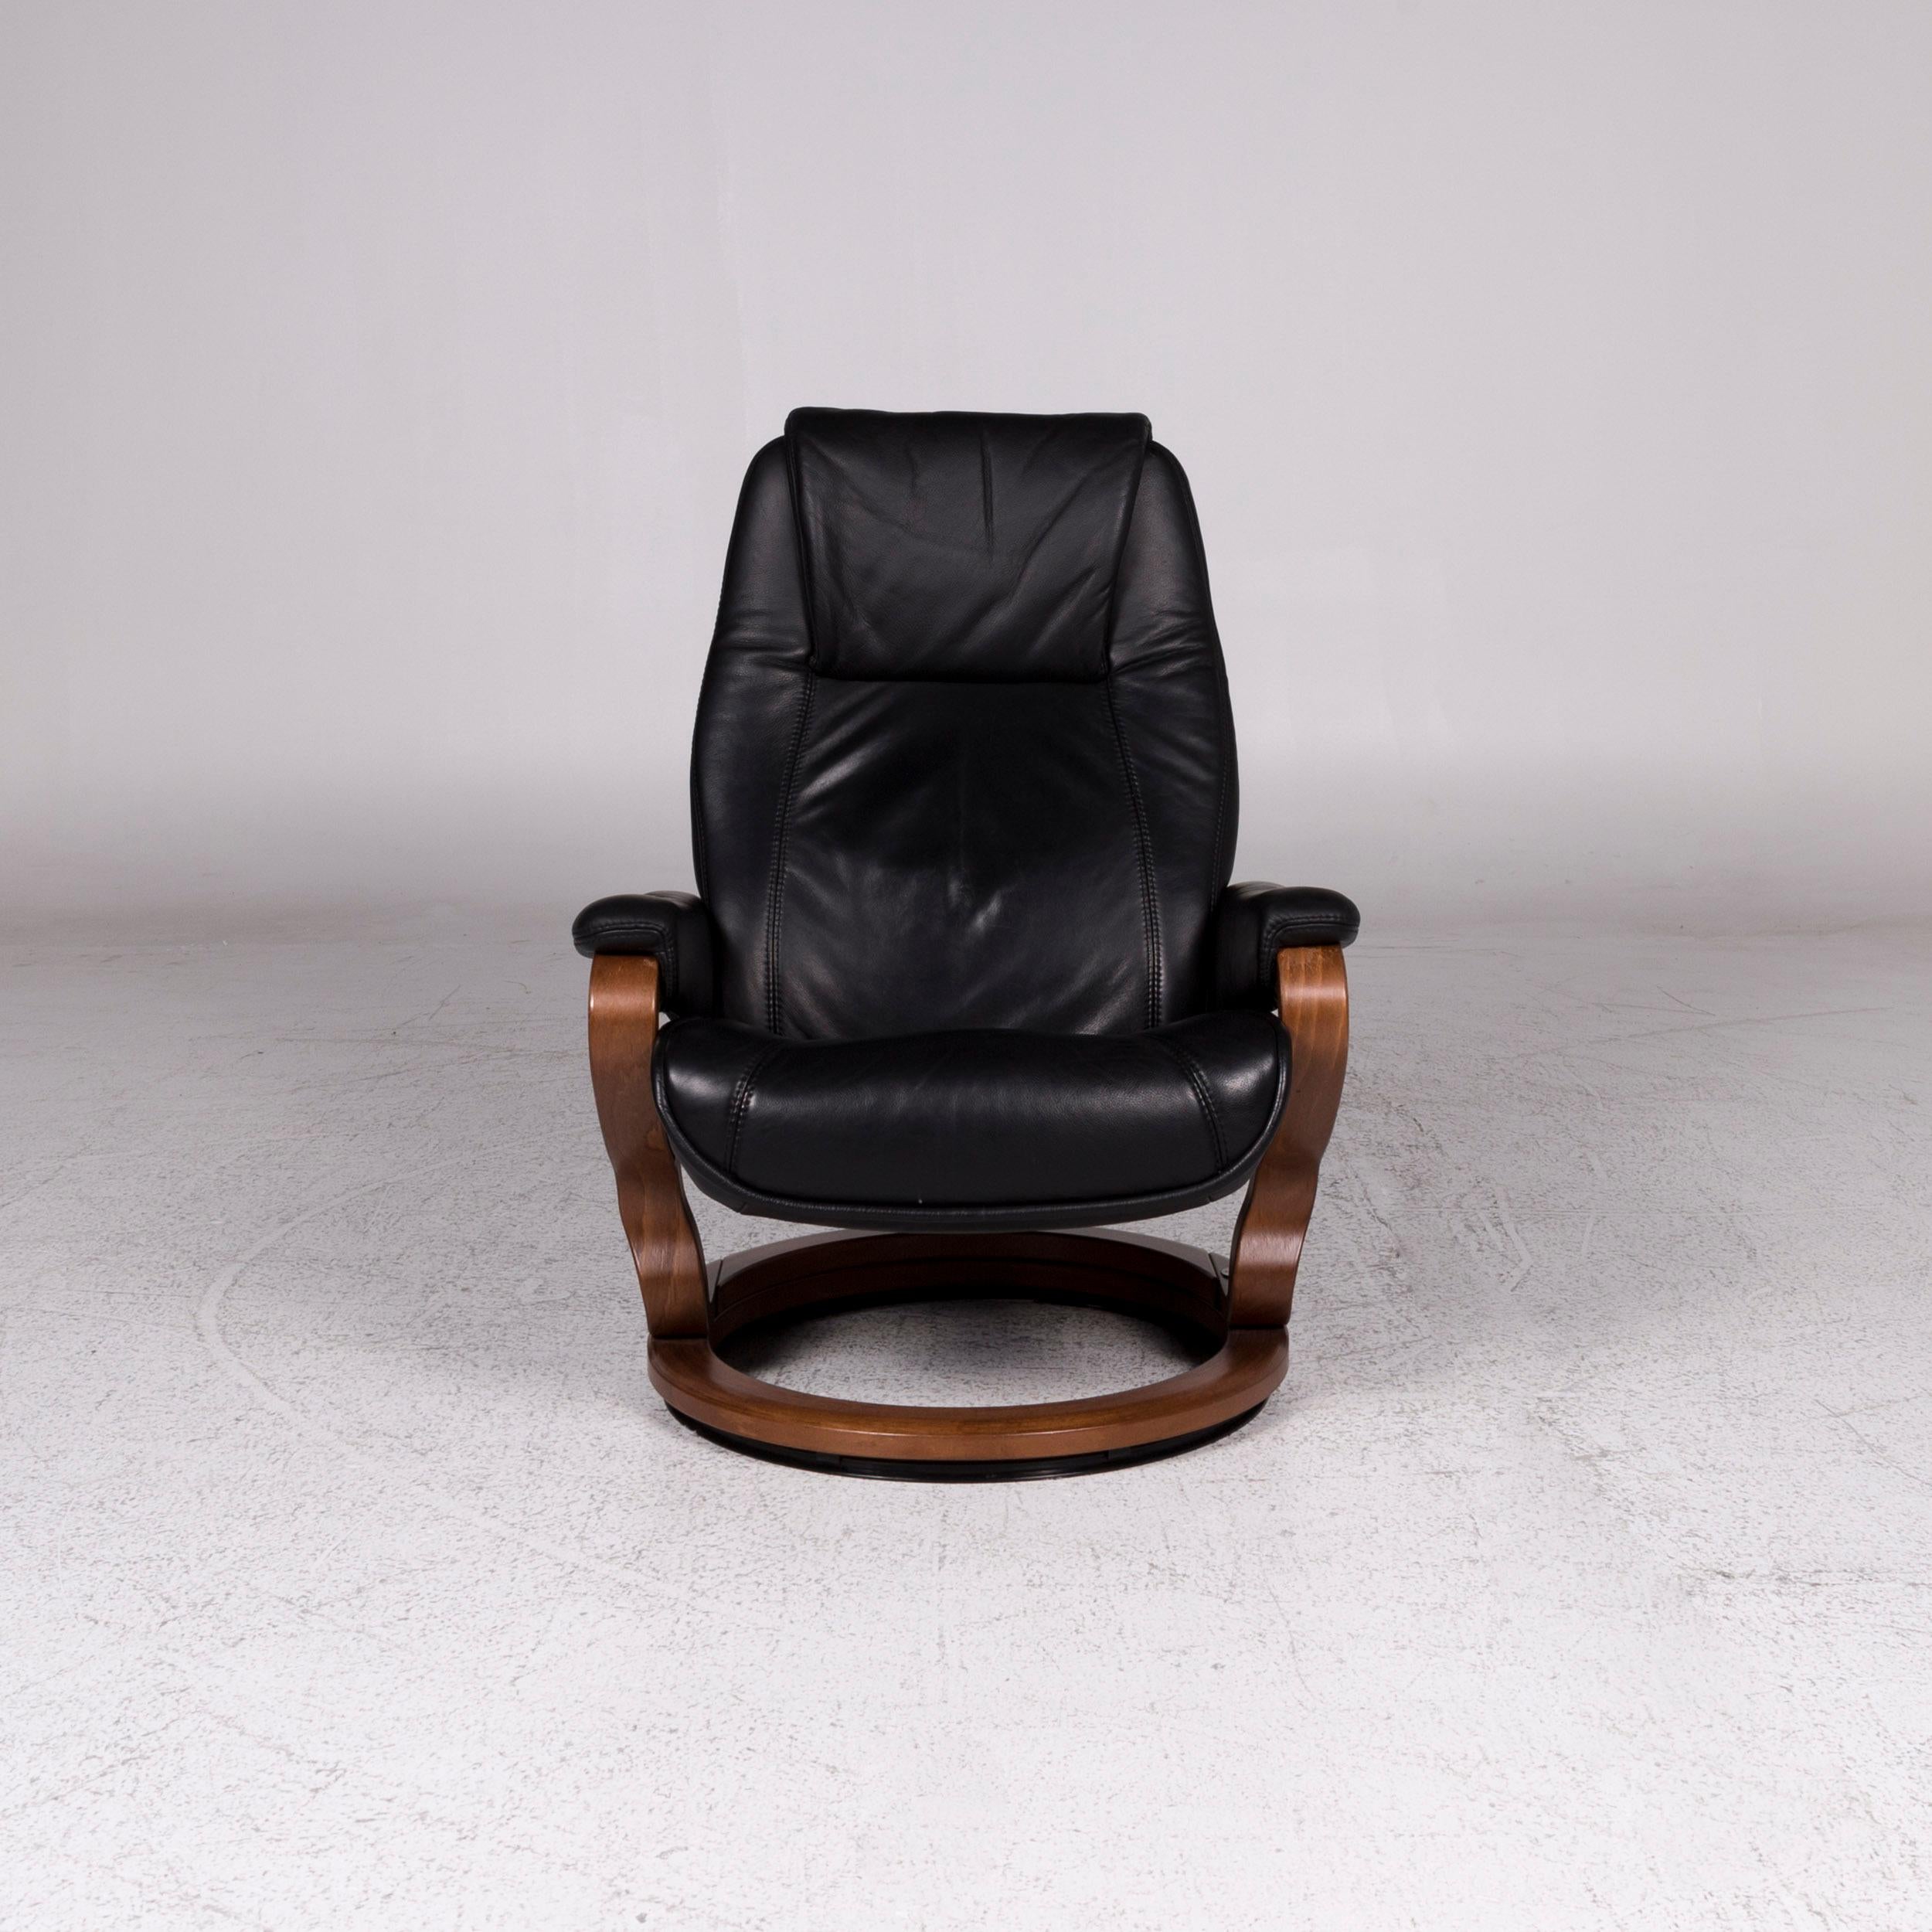 We bring to you a Himolla leather armchair black wood relax function.


 Product measurements in centimeters:
 
 Depth 82
Width 78
Height 102
Seat-height 41
Rest-height 52
Seat-depth 48
Seat-width 55
Back-height 70.